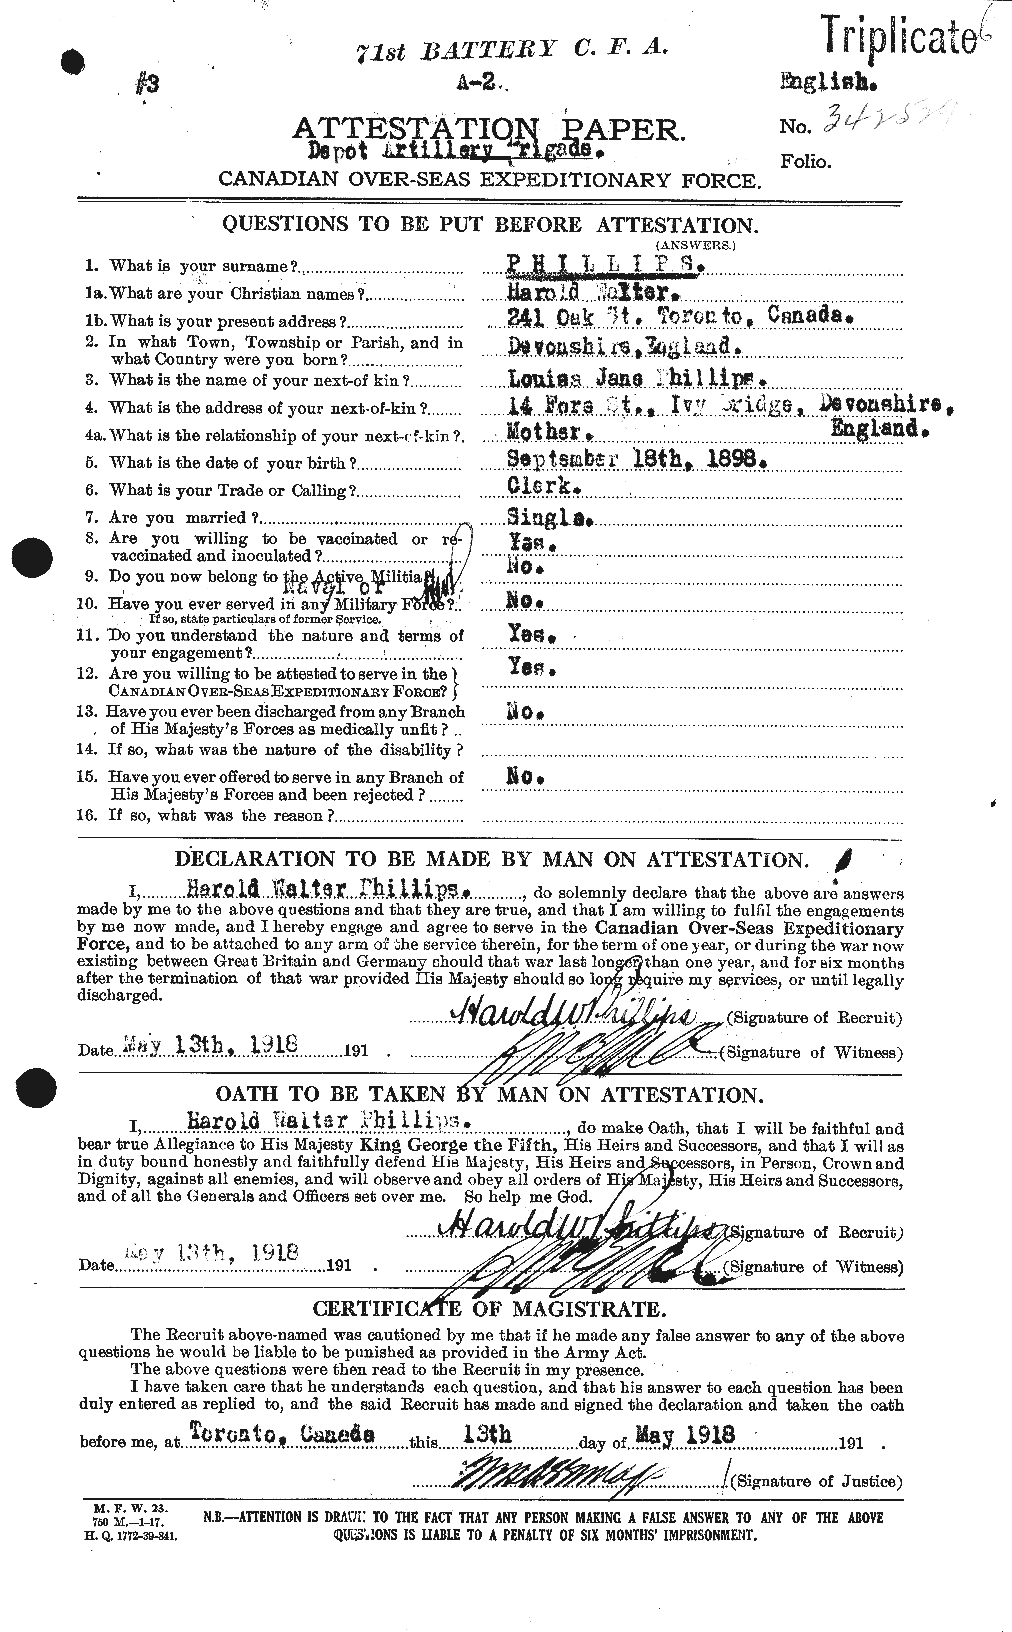 Personnel Records of the First World War - CEF 577572a